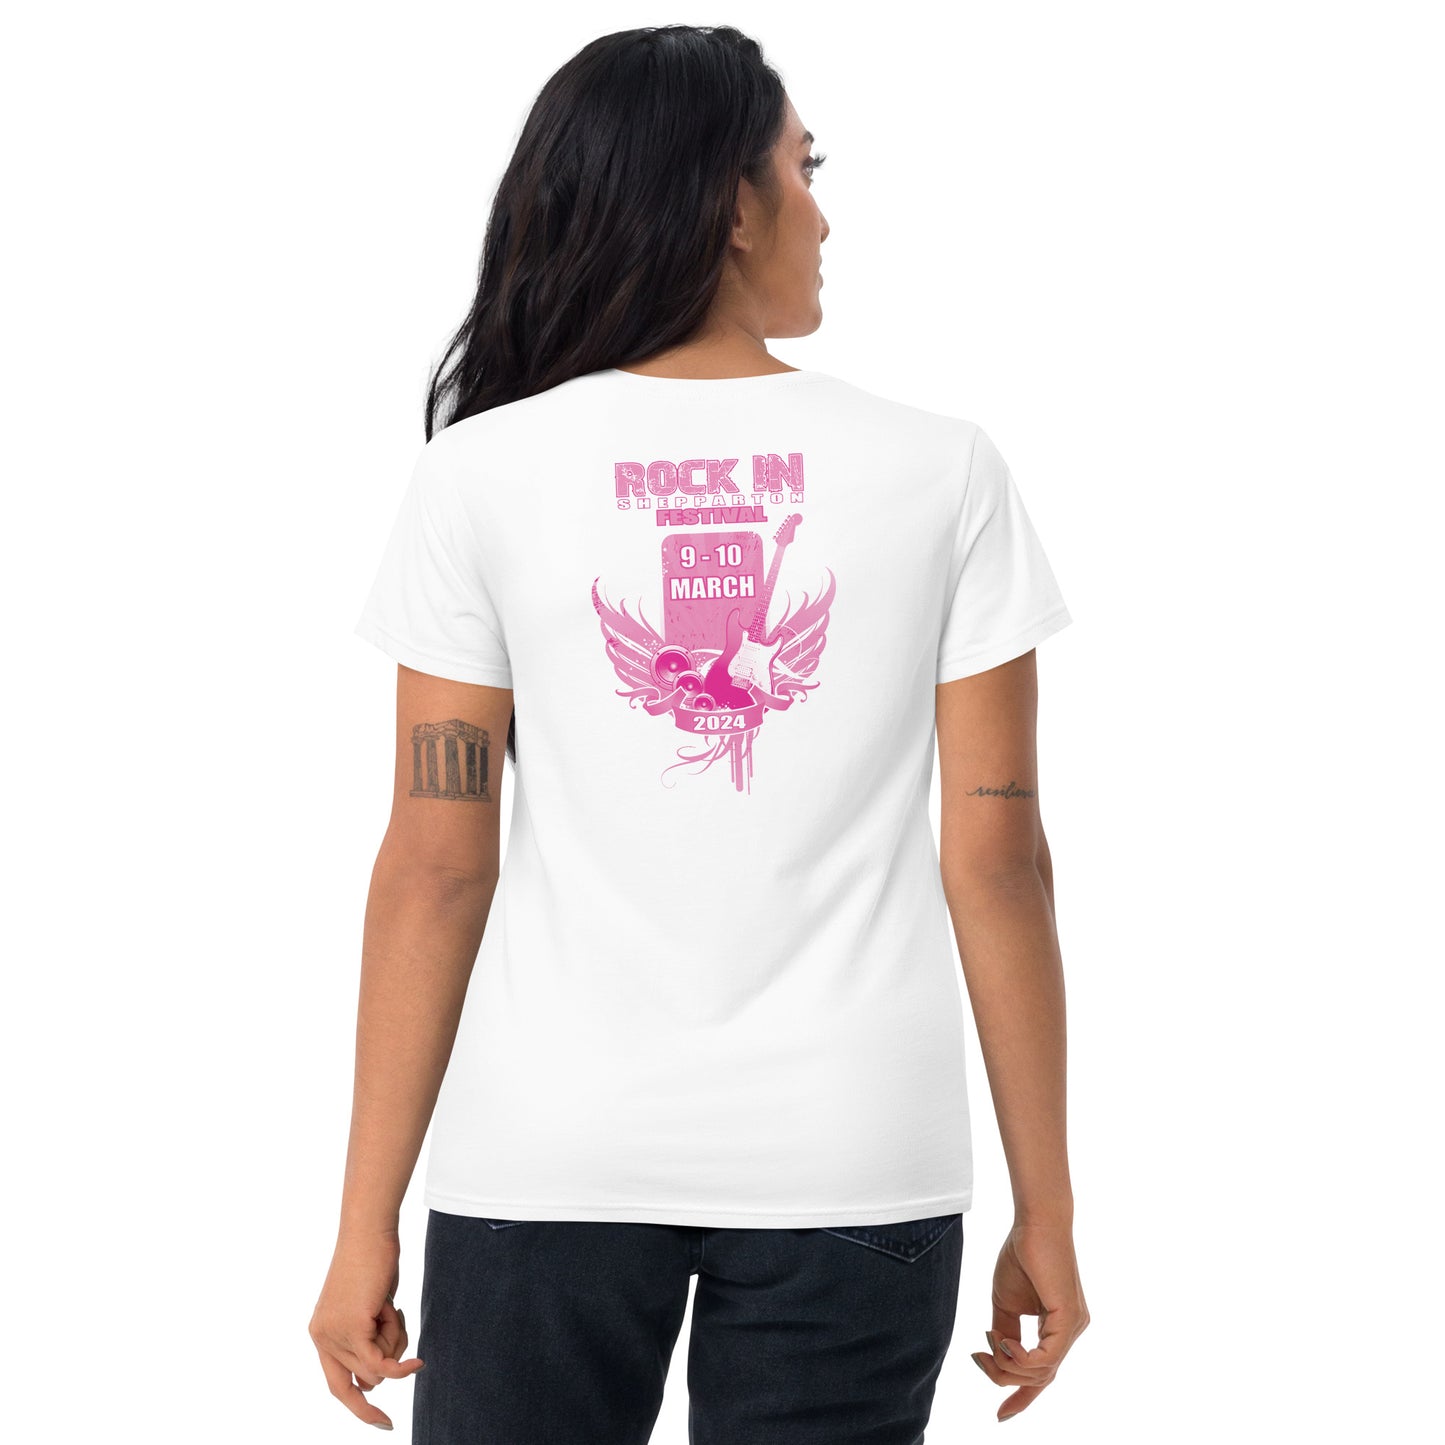 Rock In "Breast Cancer Support" Women's Short Sleeve Tee